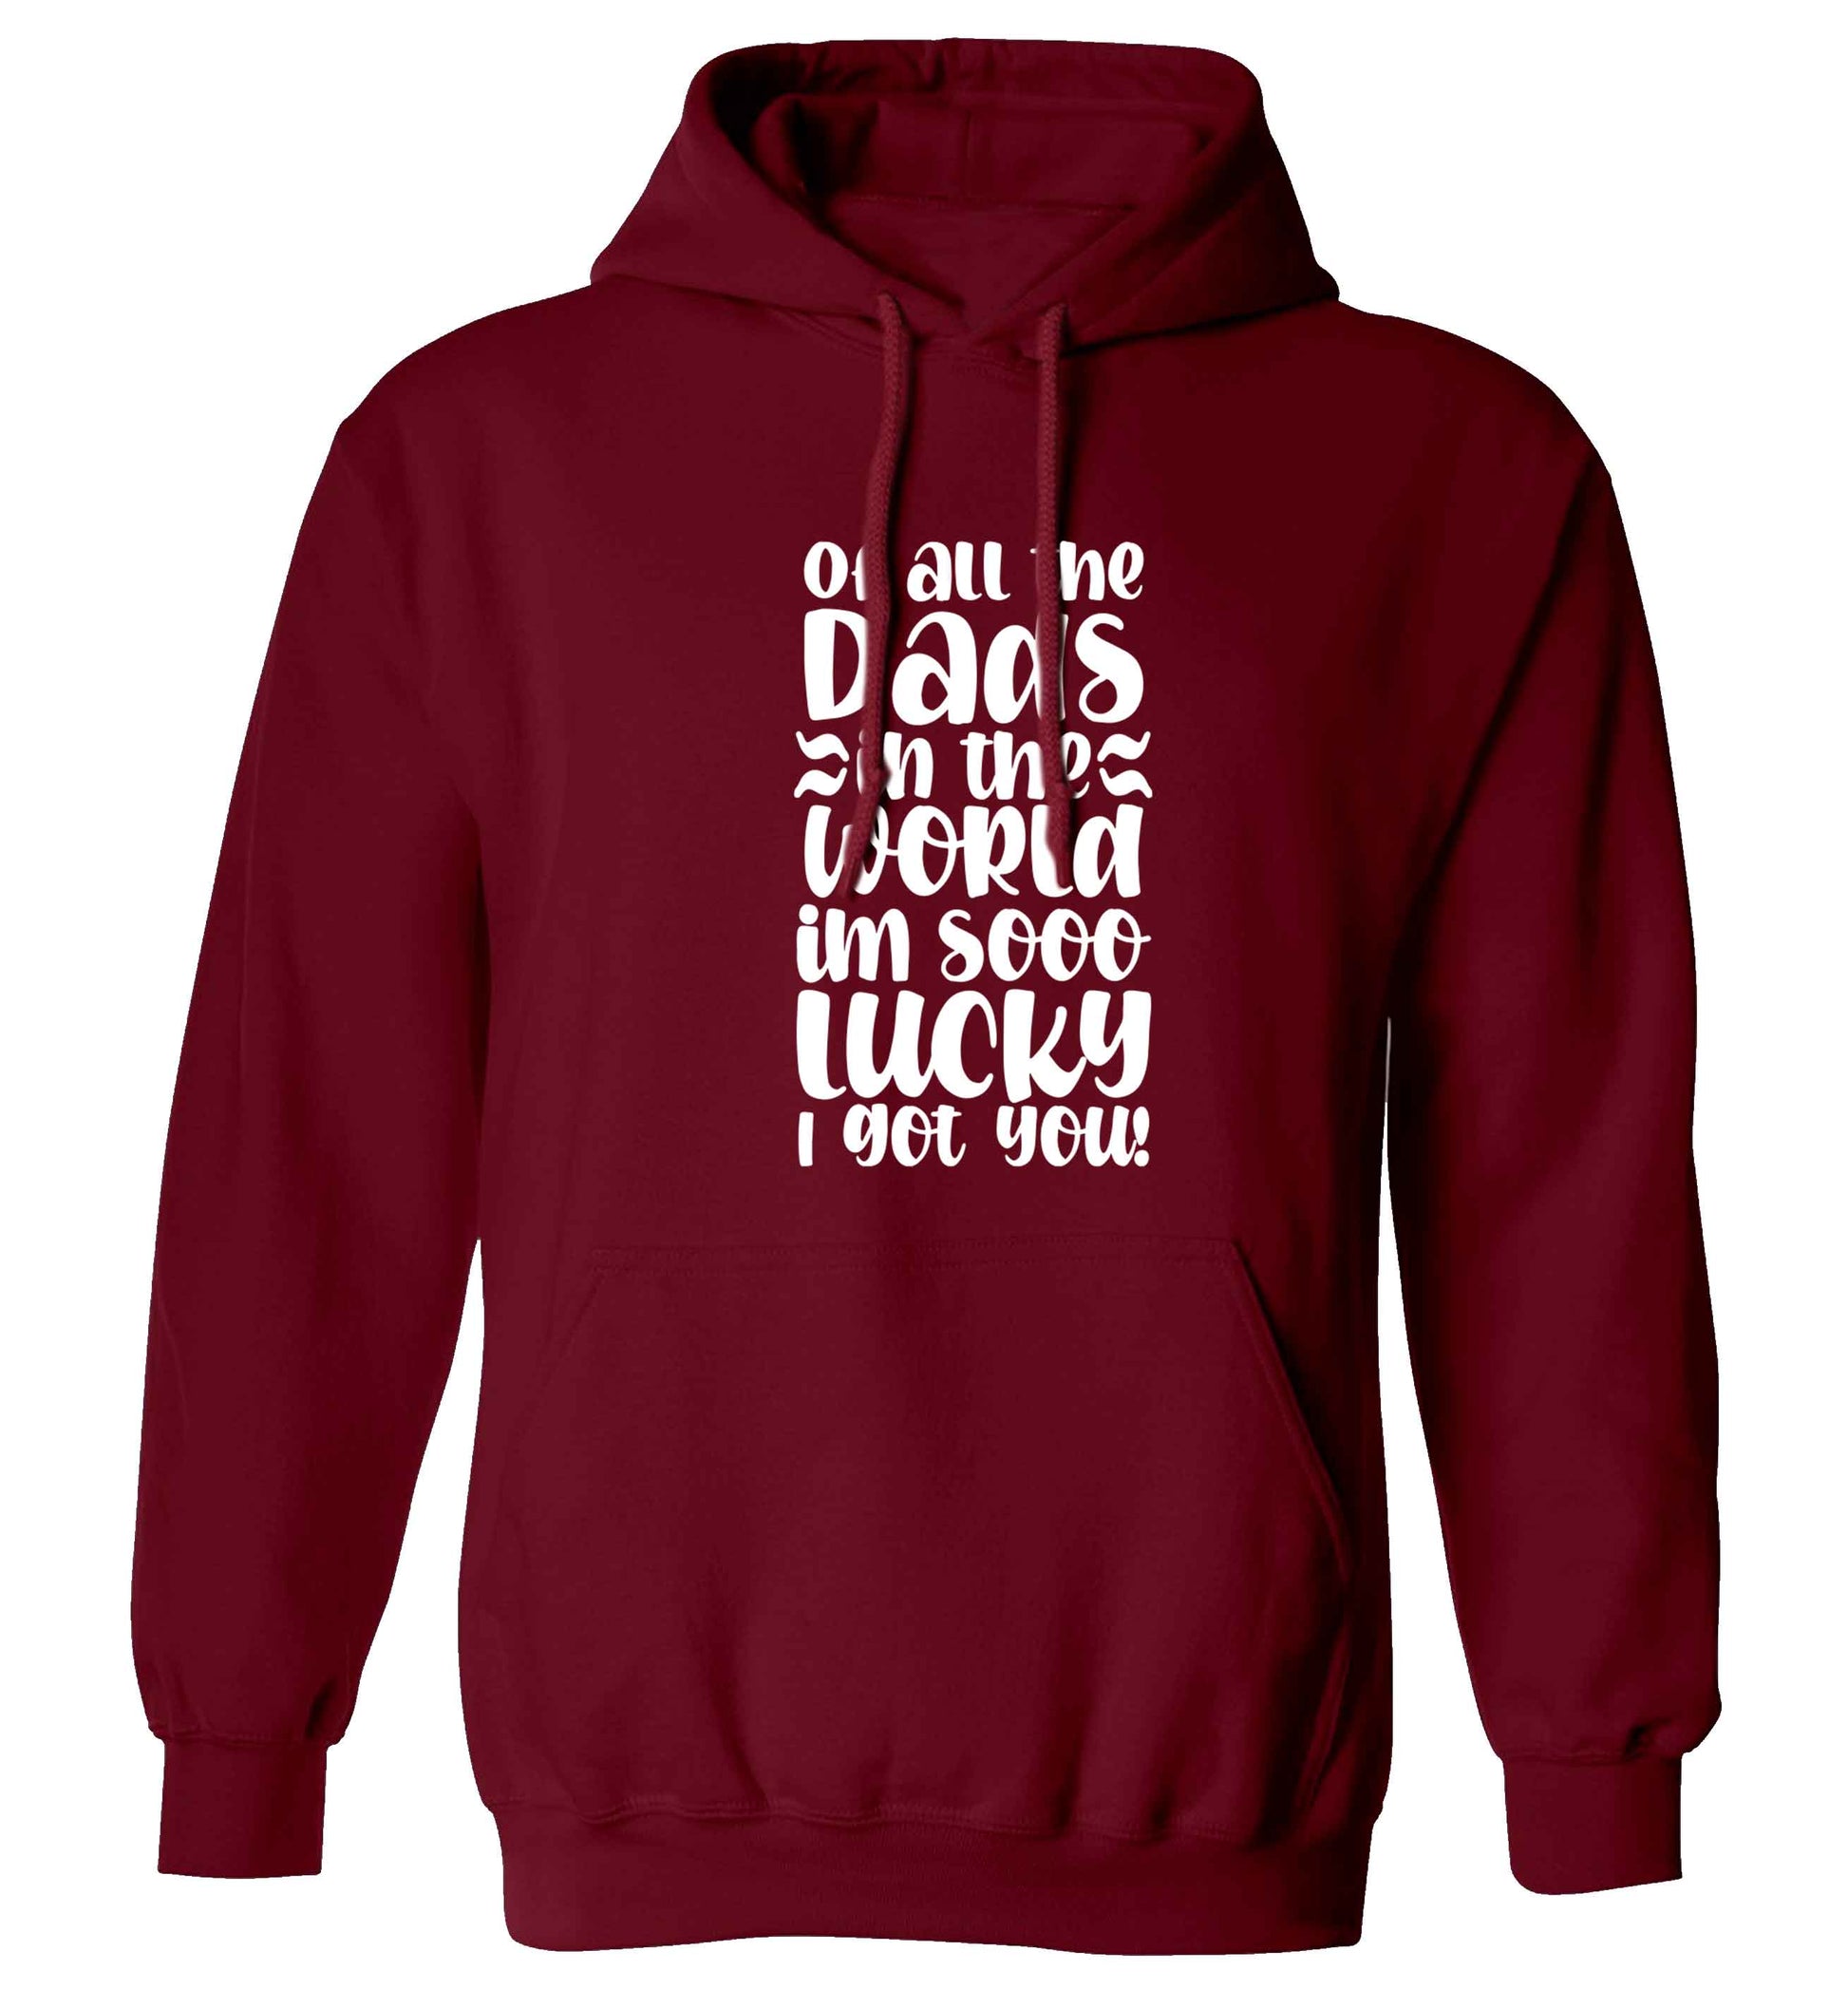 Of all the Dads in the world I'm so lucky I got you adults unisex maroon hoodie 2XL